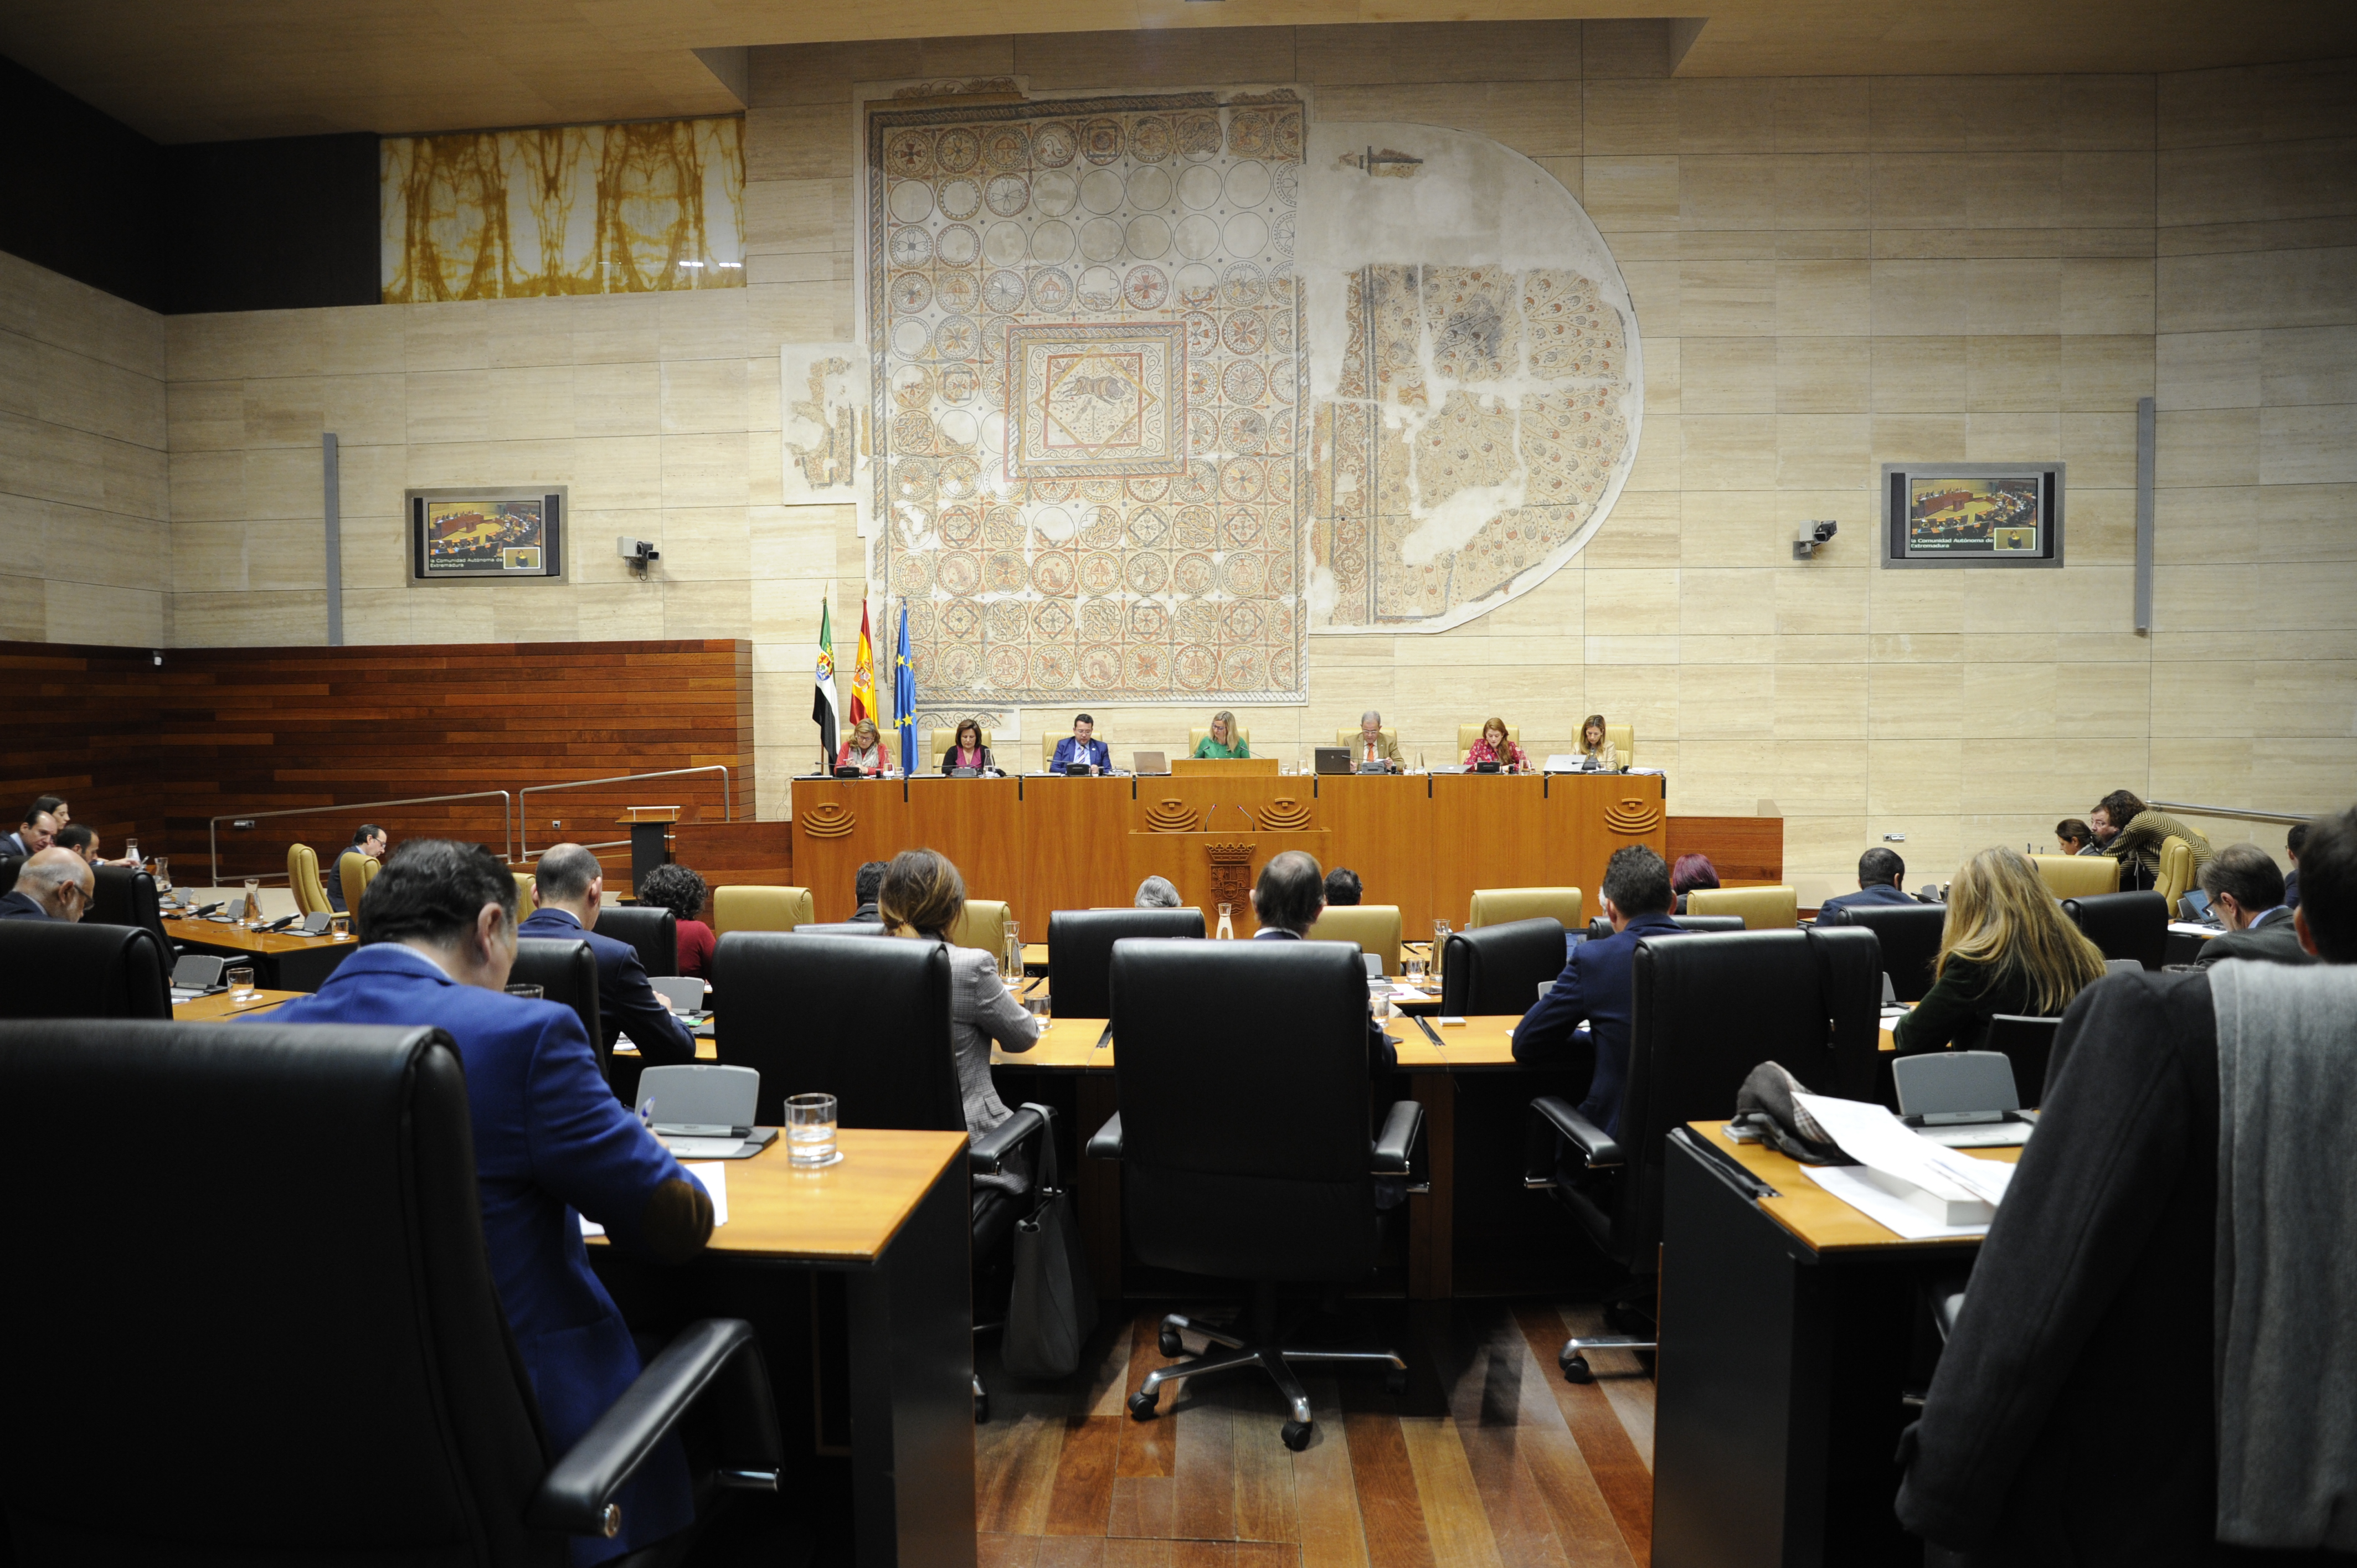 The assembly of Extremadura during its session on January 17, 2019 (by Asamblea de Extremadura)